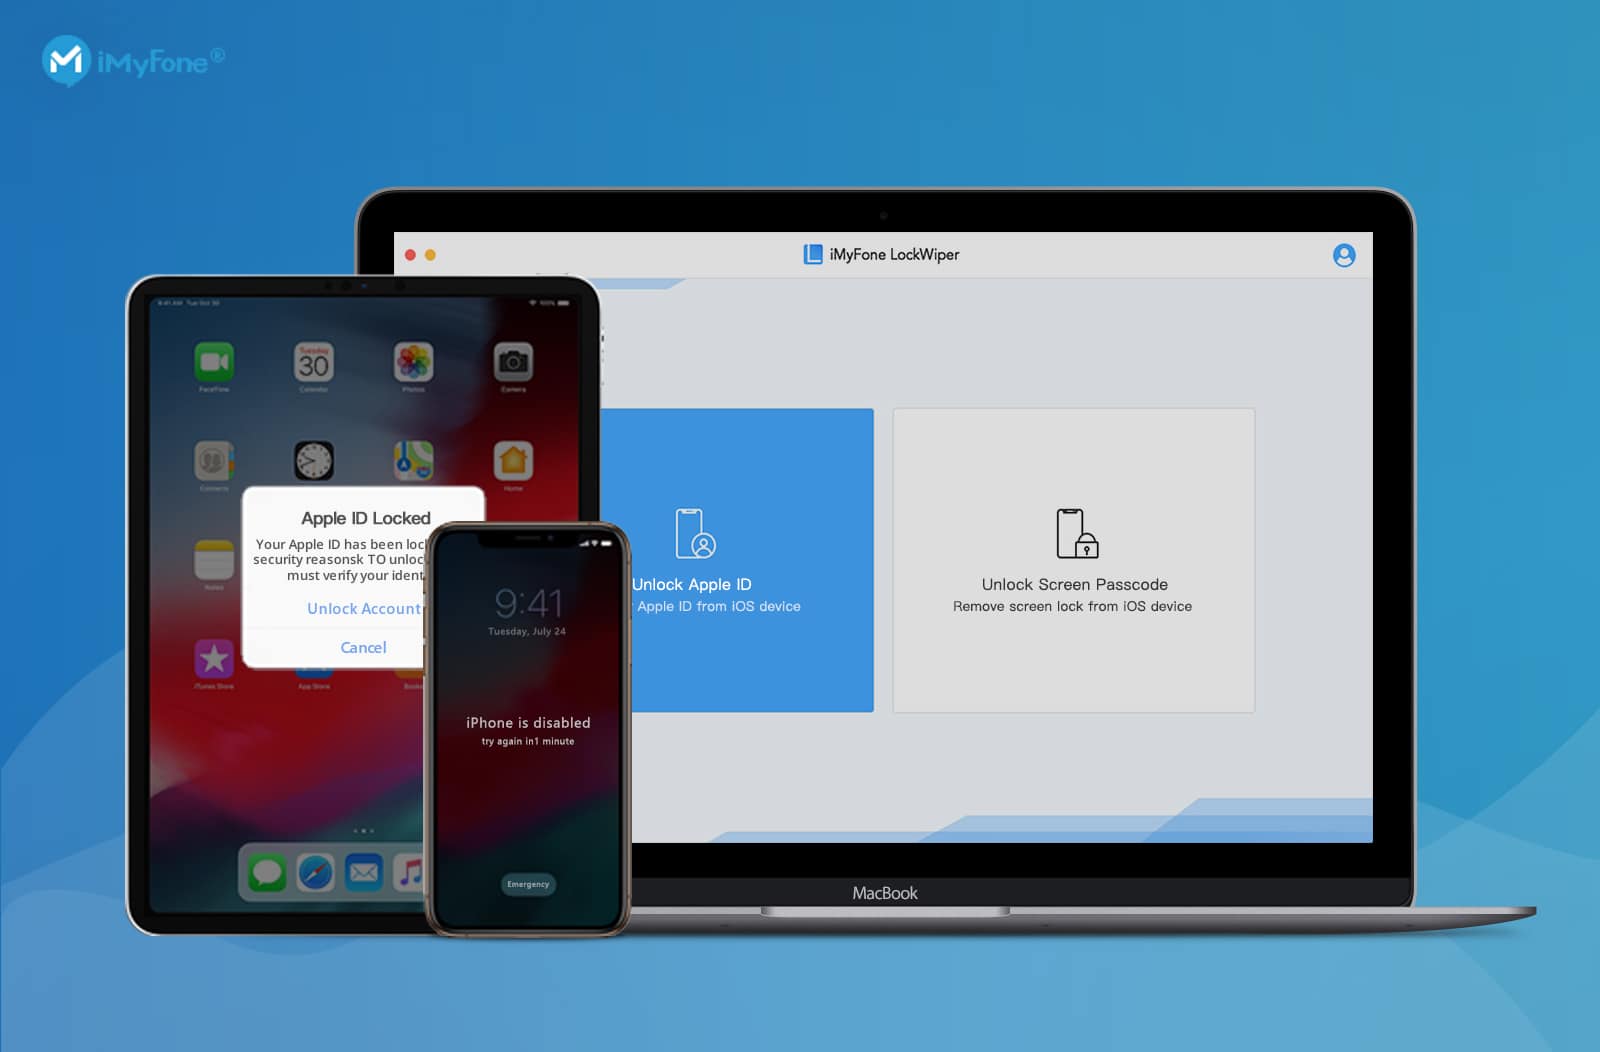 Easily bypass lock screens or forgotten Apple ID credentials with this handy tool.